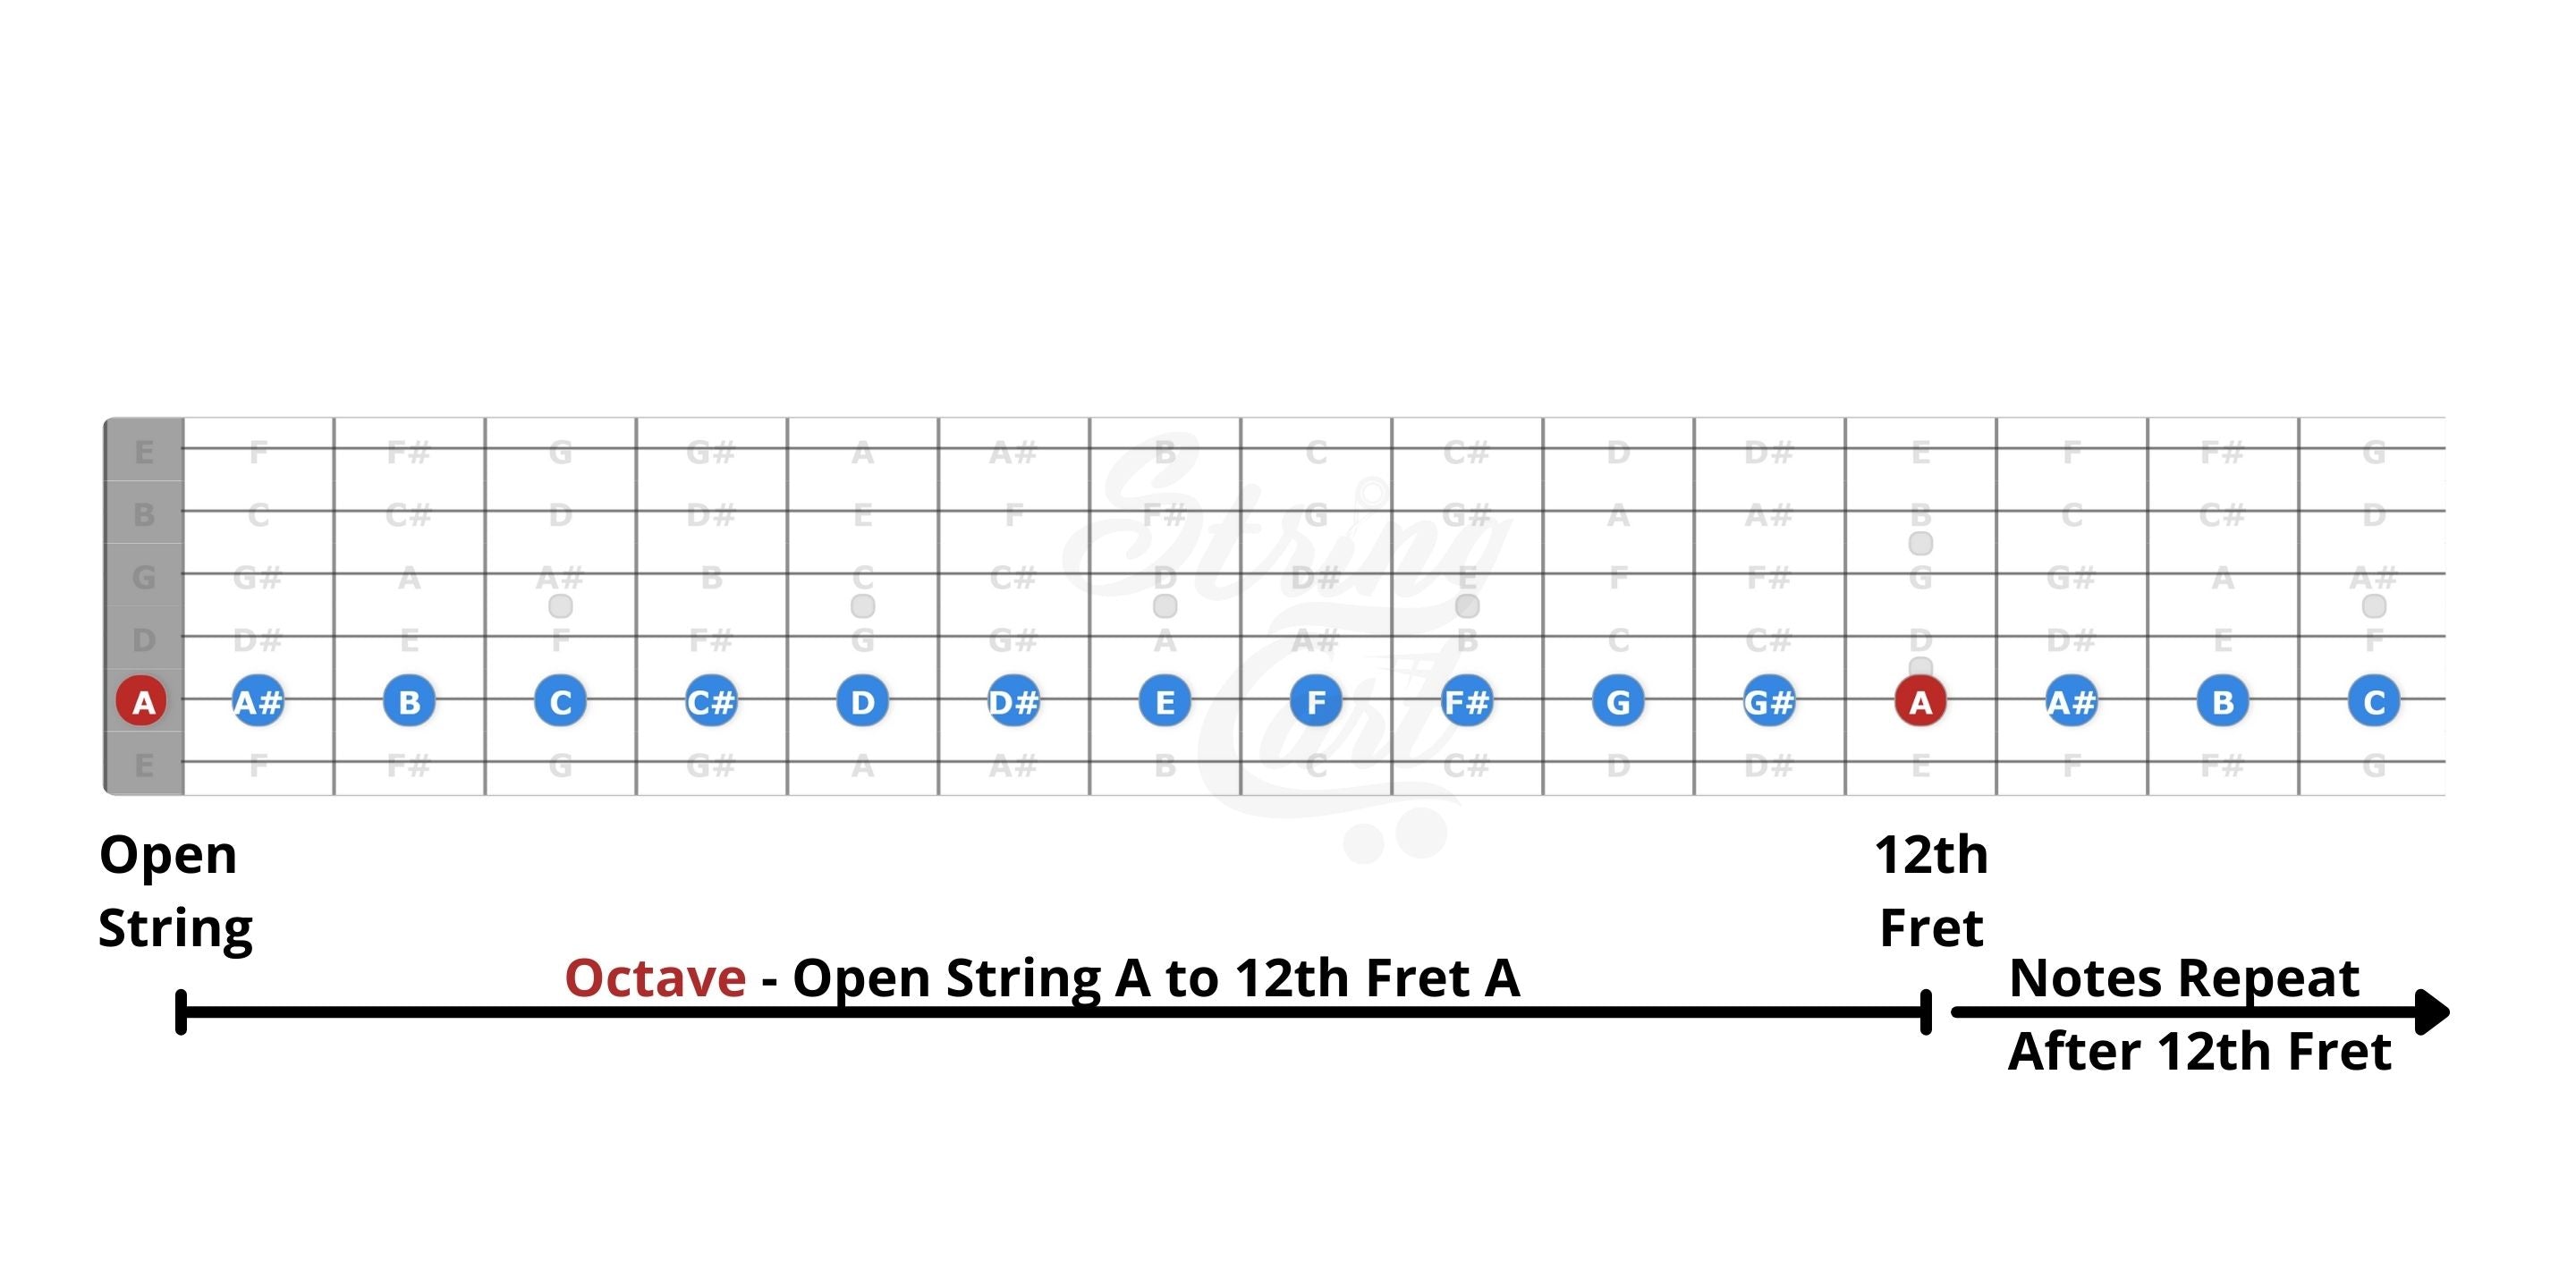 Notes played on 5th string of the guitar